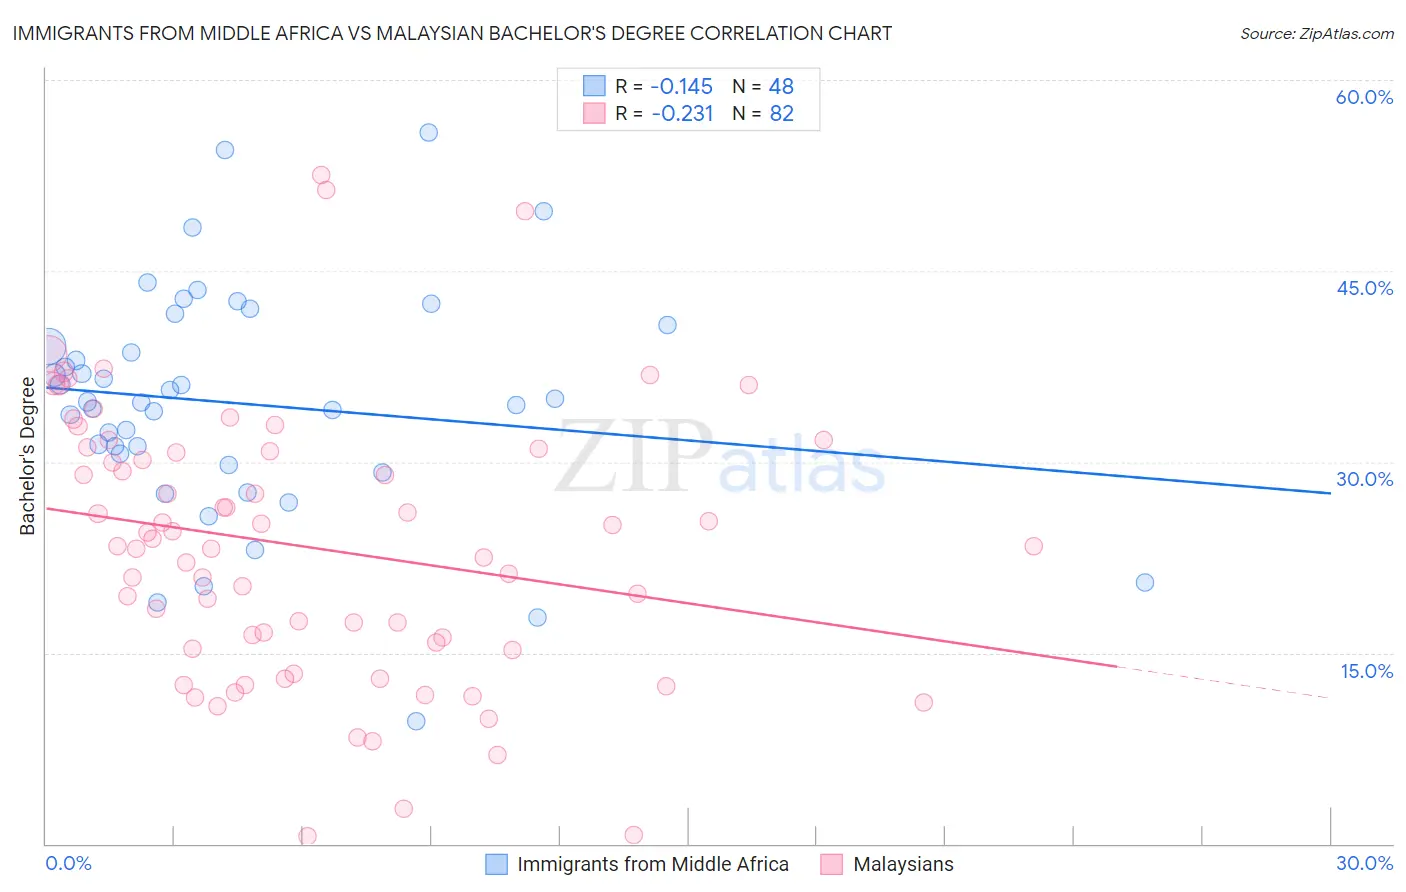 Immigrants from Middle Africa vs Malaysian Bachelor's Degree